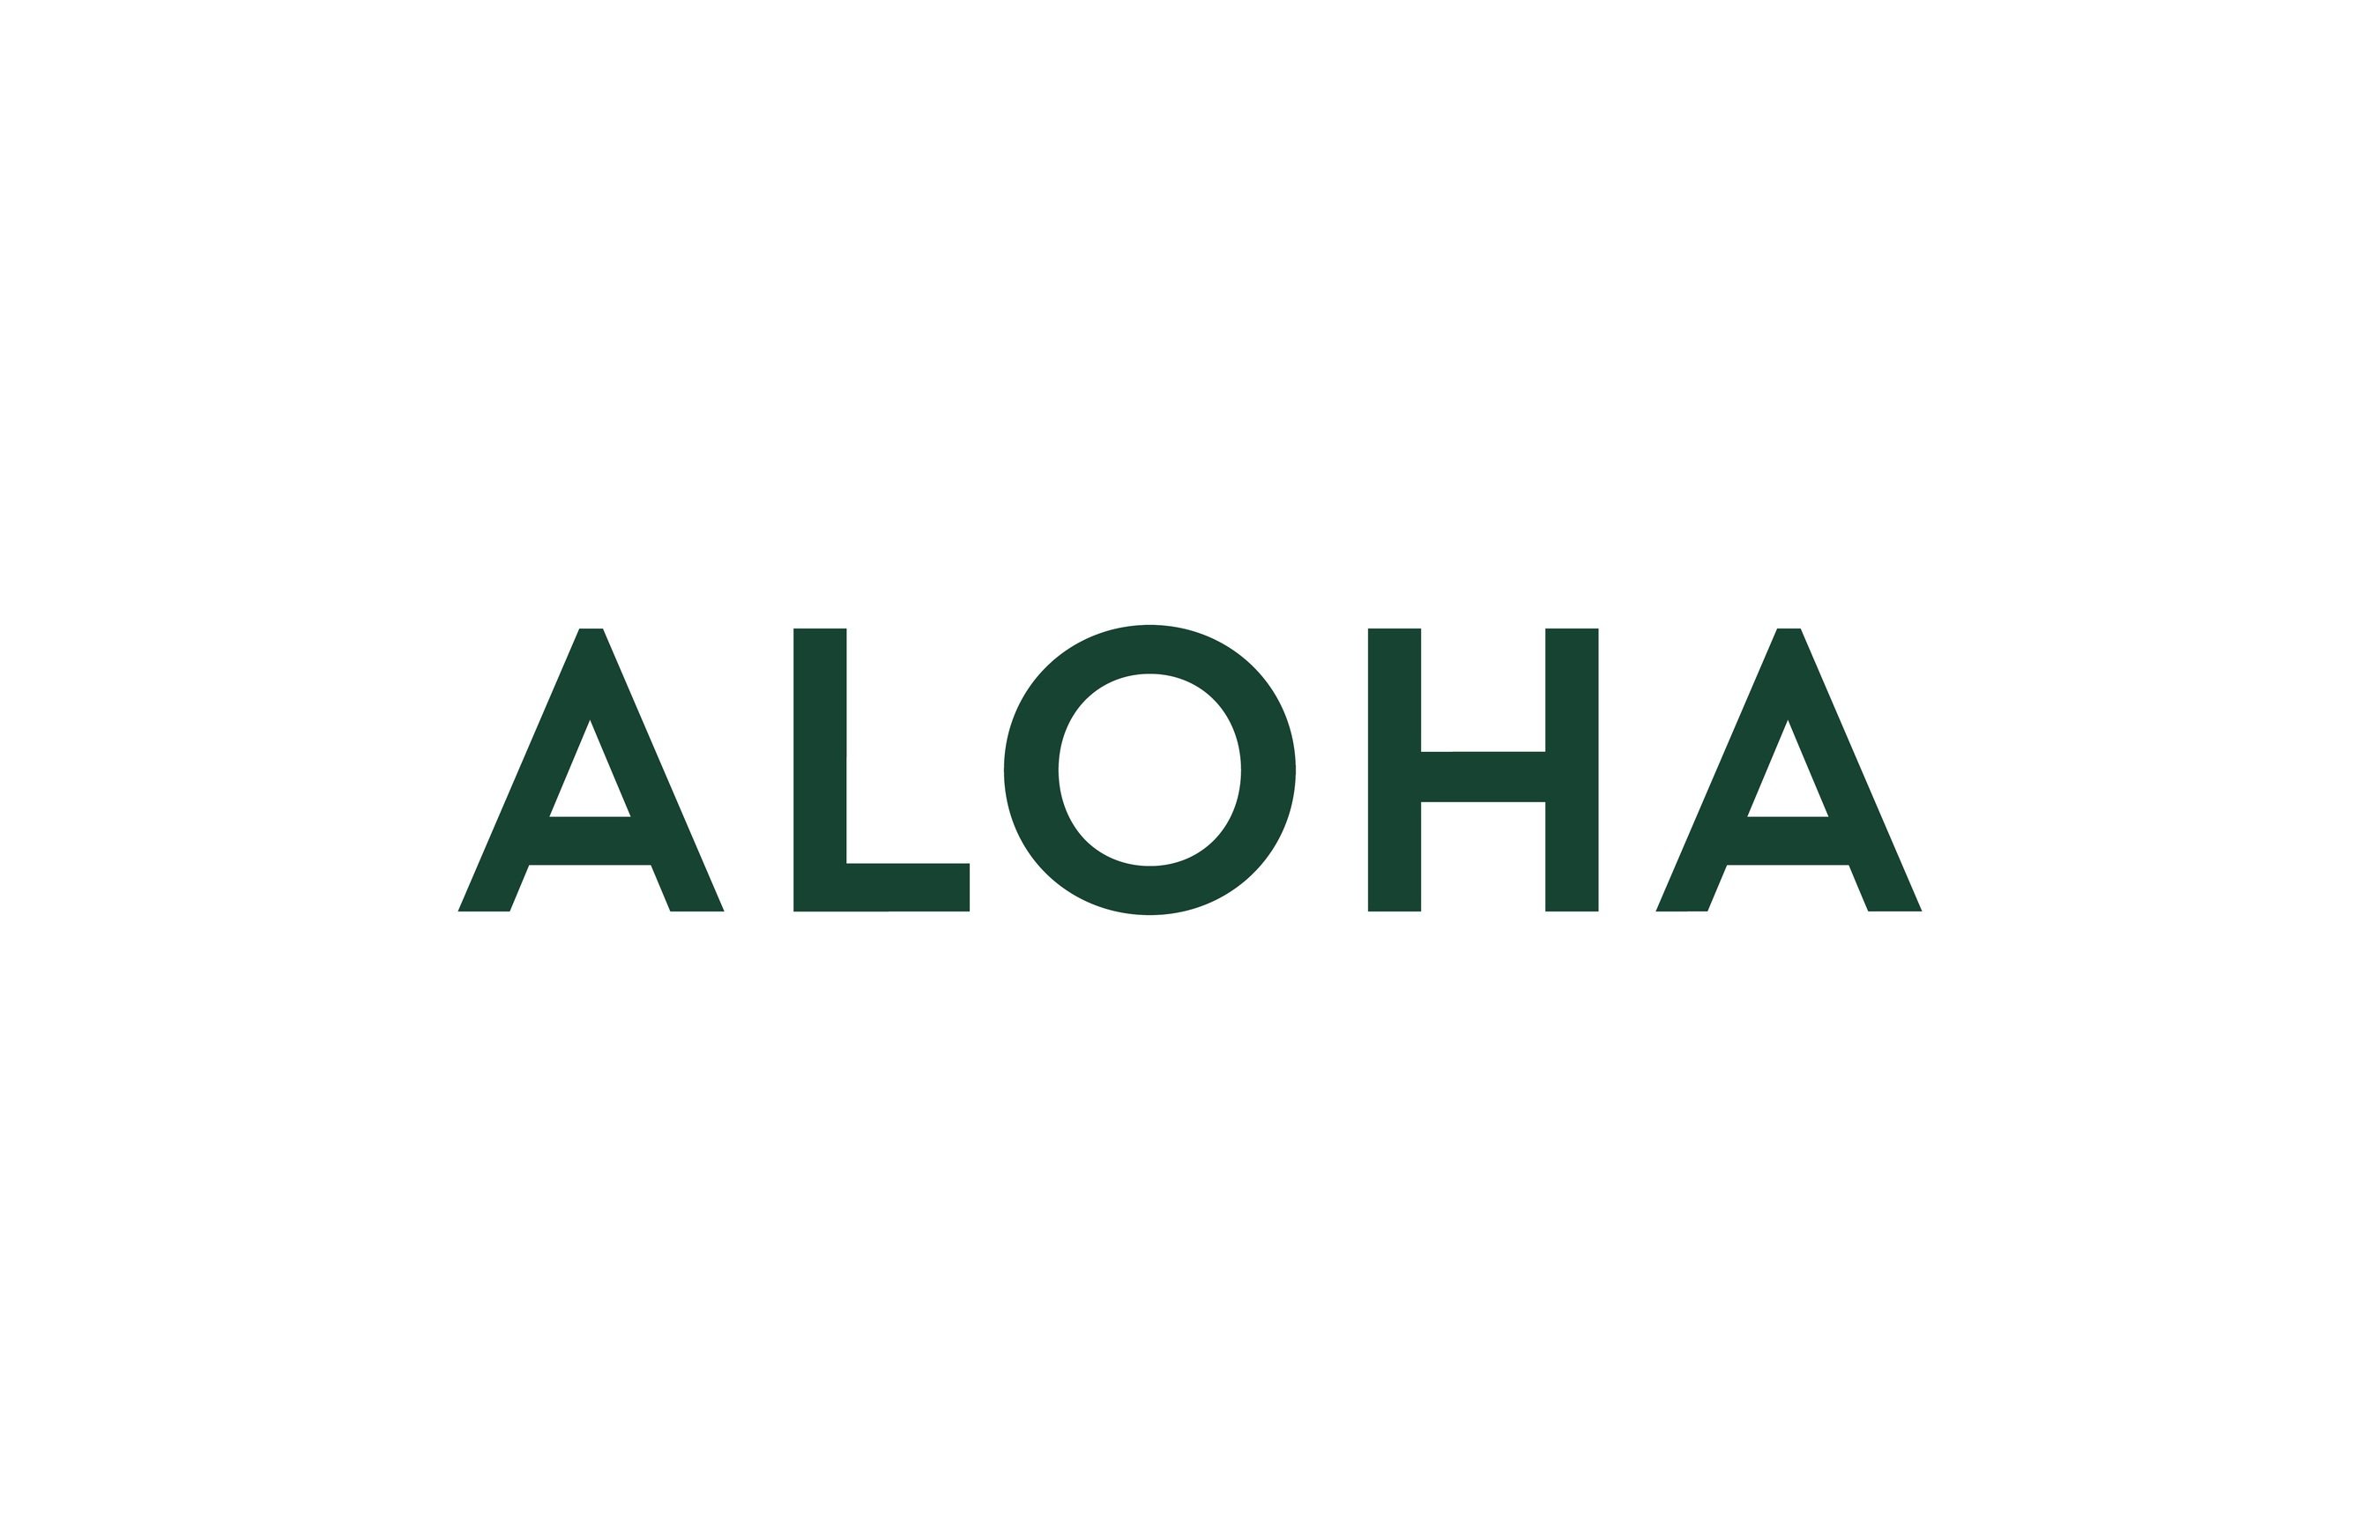 Aloha Introduces Plant Based Protein Powder With Mct Oil And Expands Retail Presence